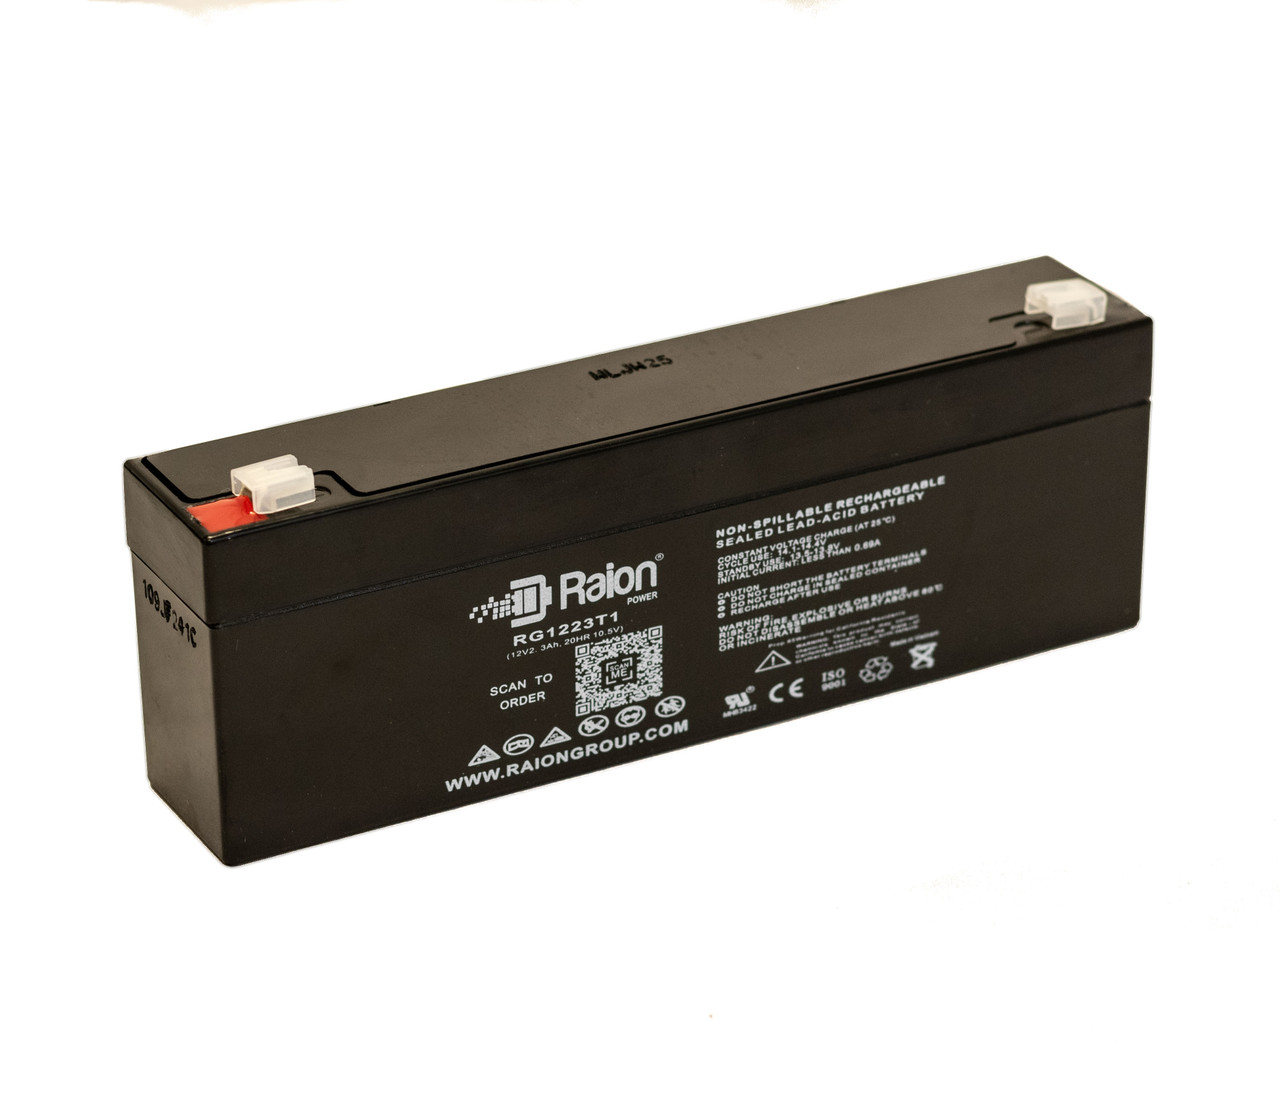 Raion Power RG1223T1 Replacement Battery for Johnson Controls GC1215